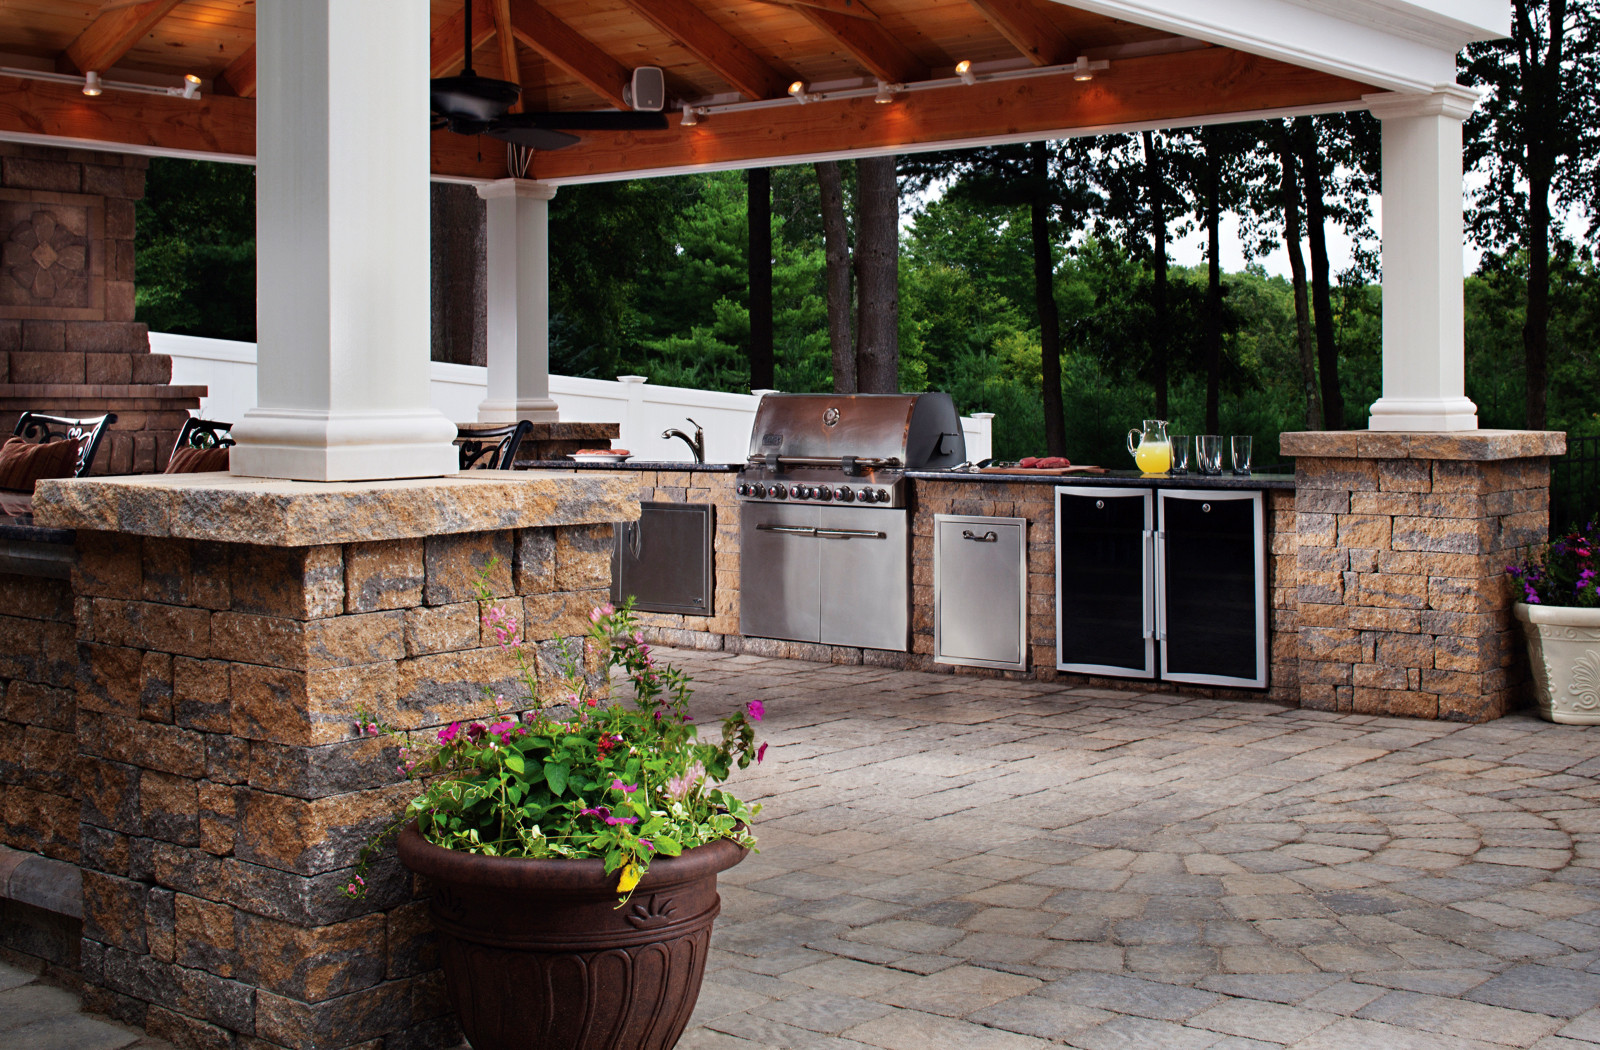 Belgard Outdoor Kitchen
 Find Out What s Cooking in the Latest Outdoor Kitchen